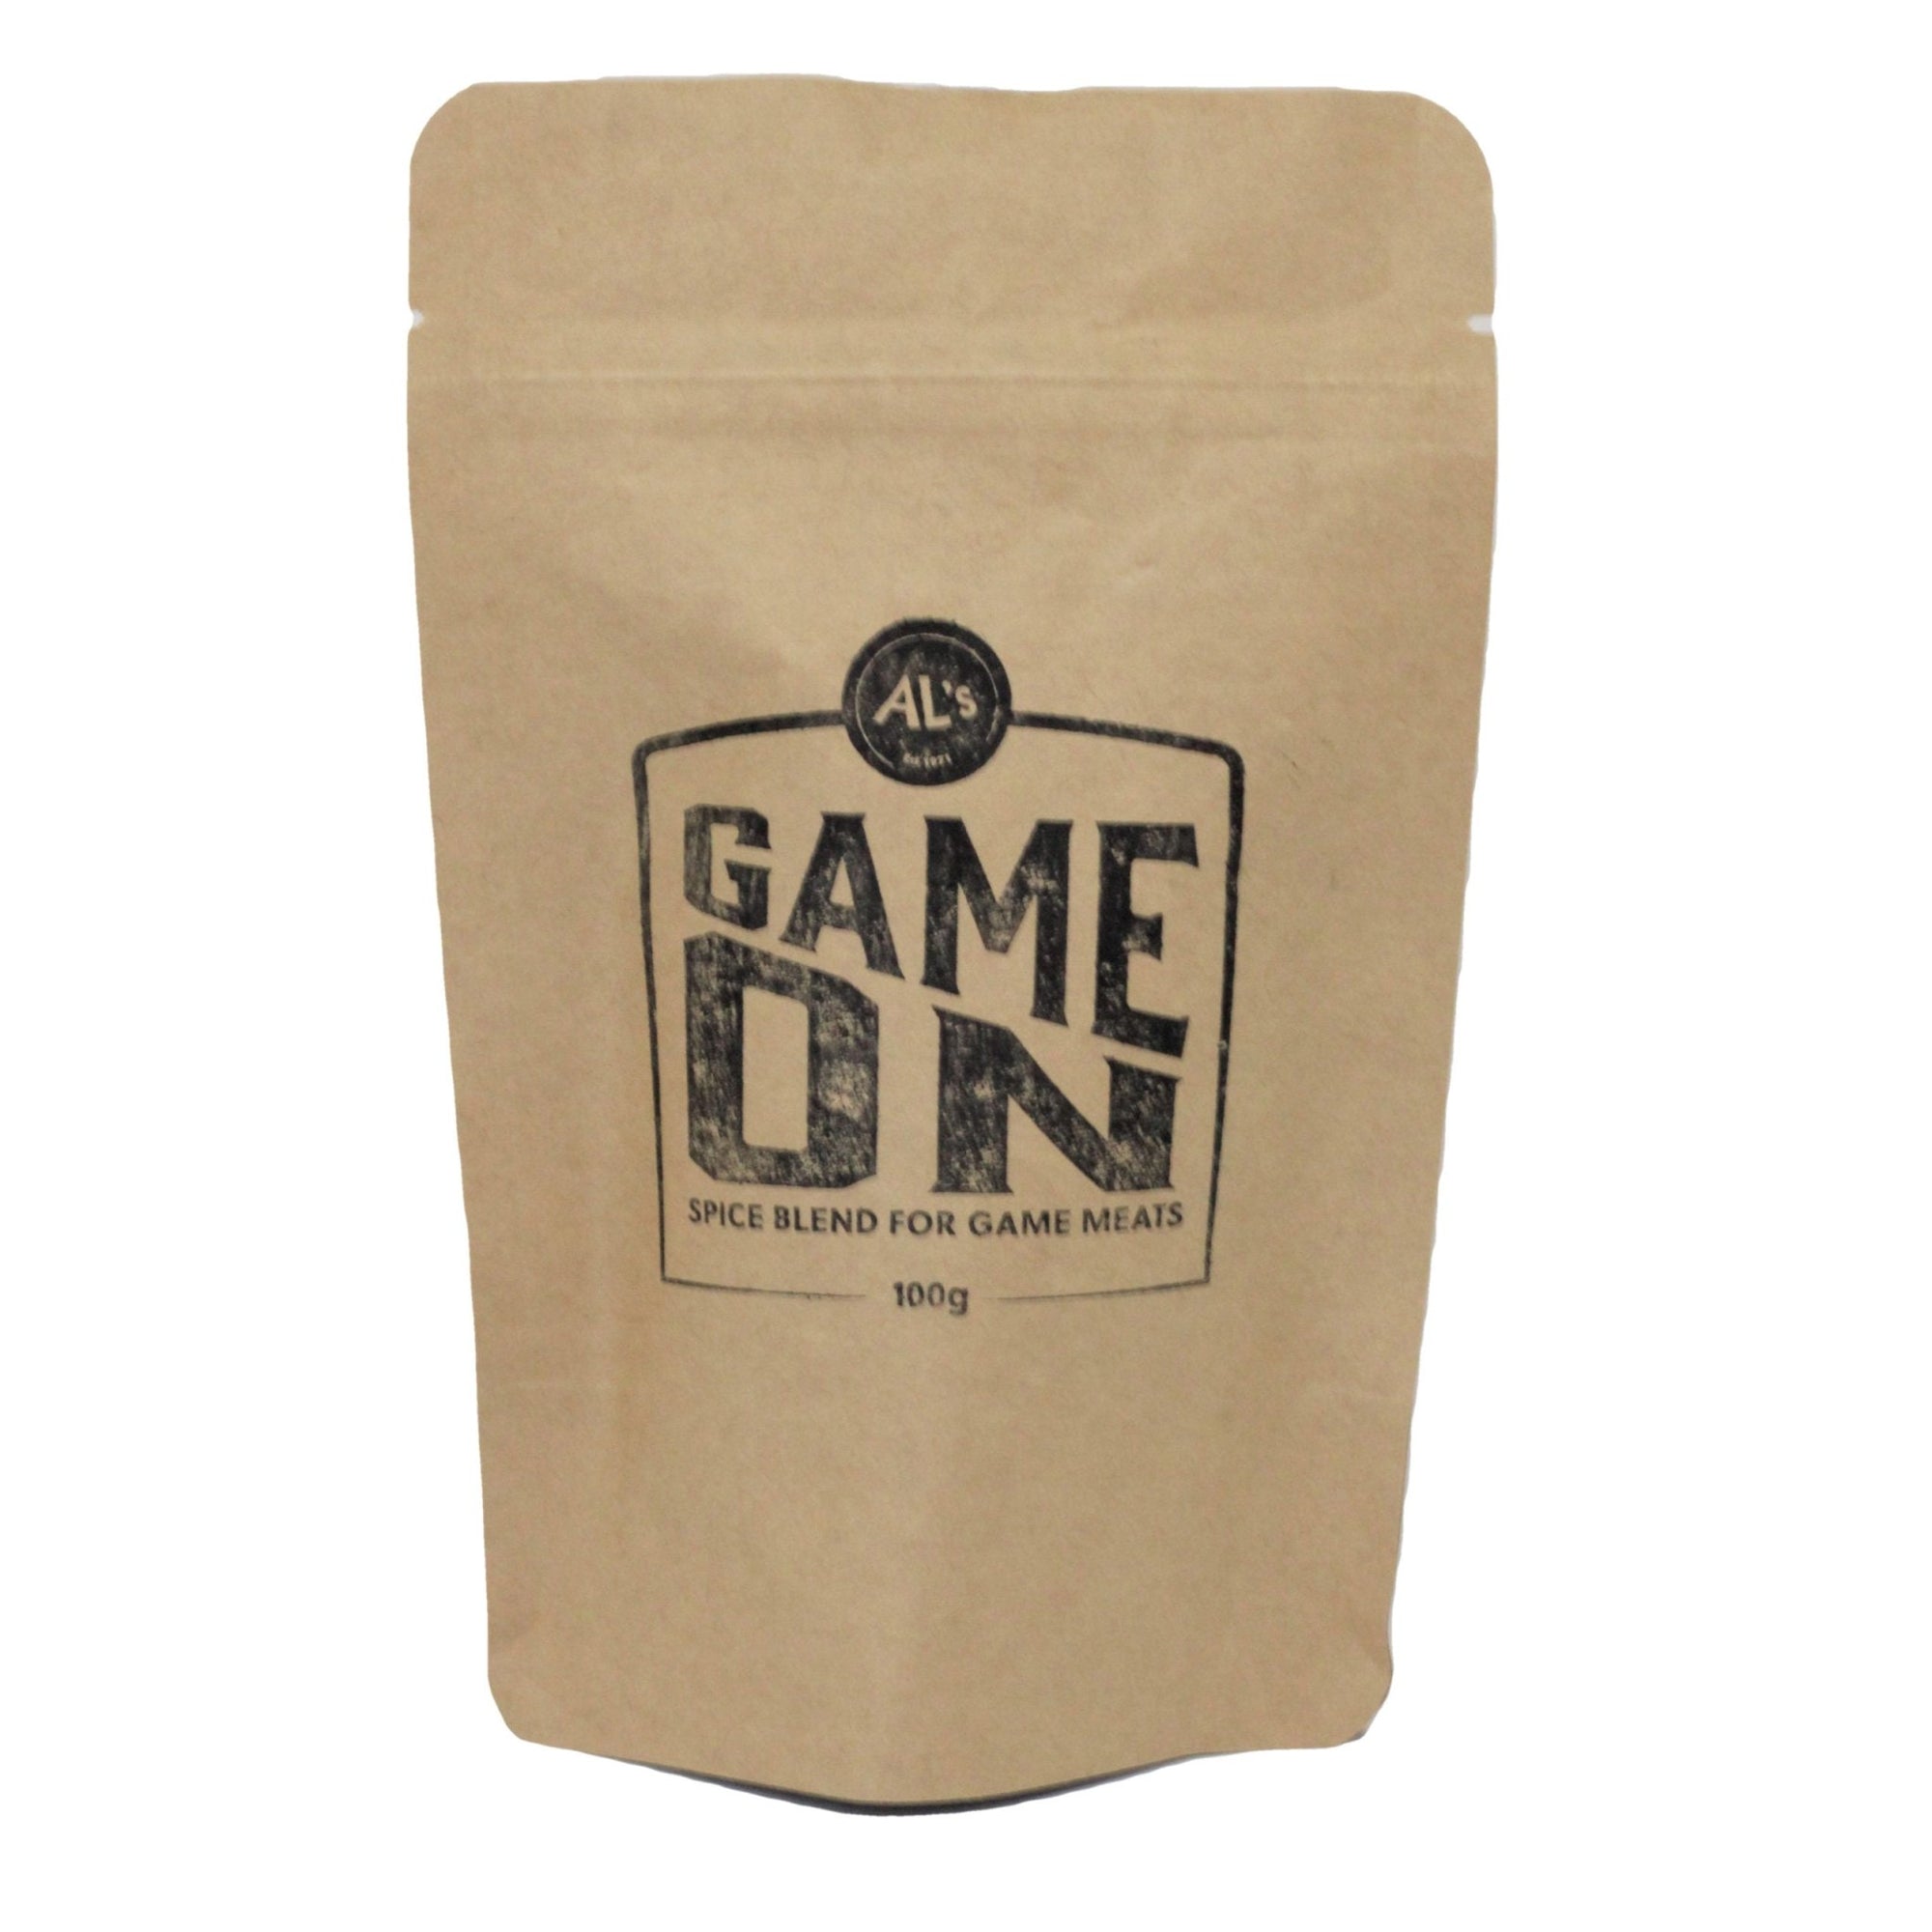 Al's Game on Spice mix - Beautiful Gifts - Packaged with Love